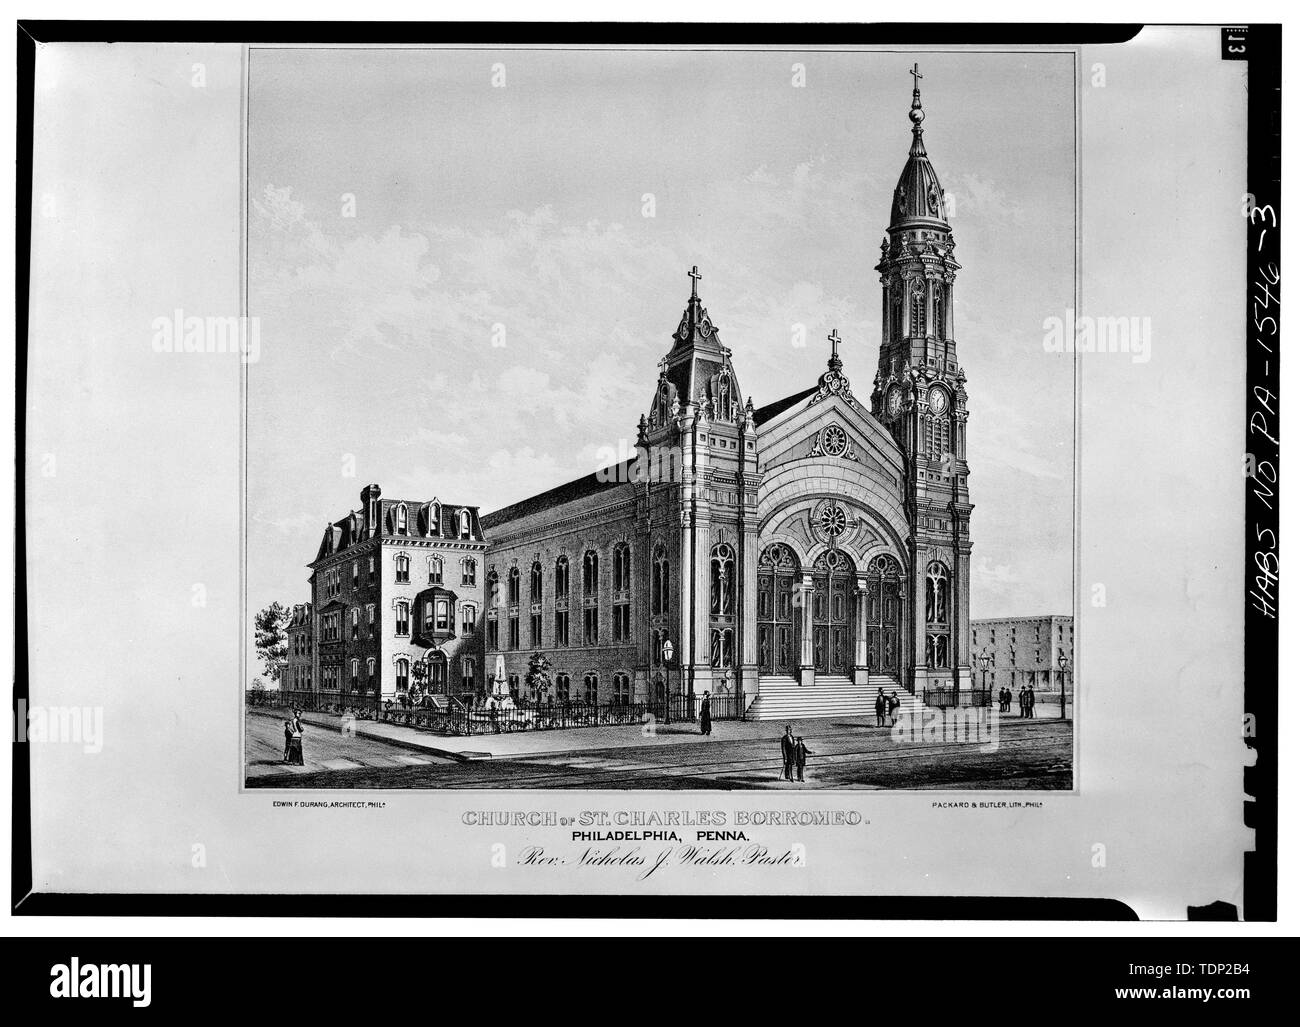 Photocopy of lithograph, VIEW OF CHURCH, ca. 1885. In the collection of the American Catholic Historical Society, Philadelphia, Pa. - St. Charles Borromeo Roman Catholic Church, 900 South Twentieth Street, Philadelphia, Philadelphia County, PA Stock Photo